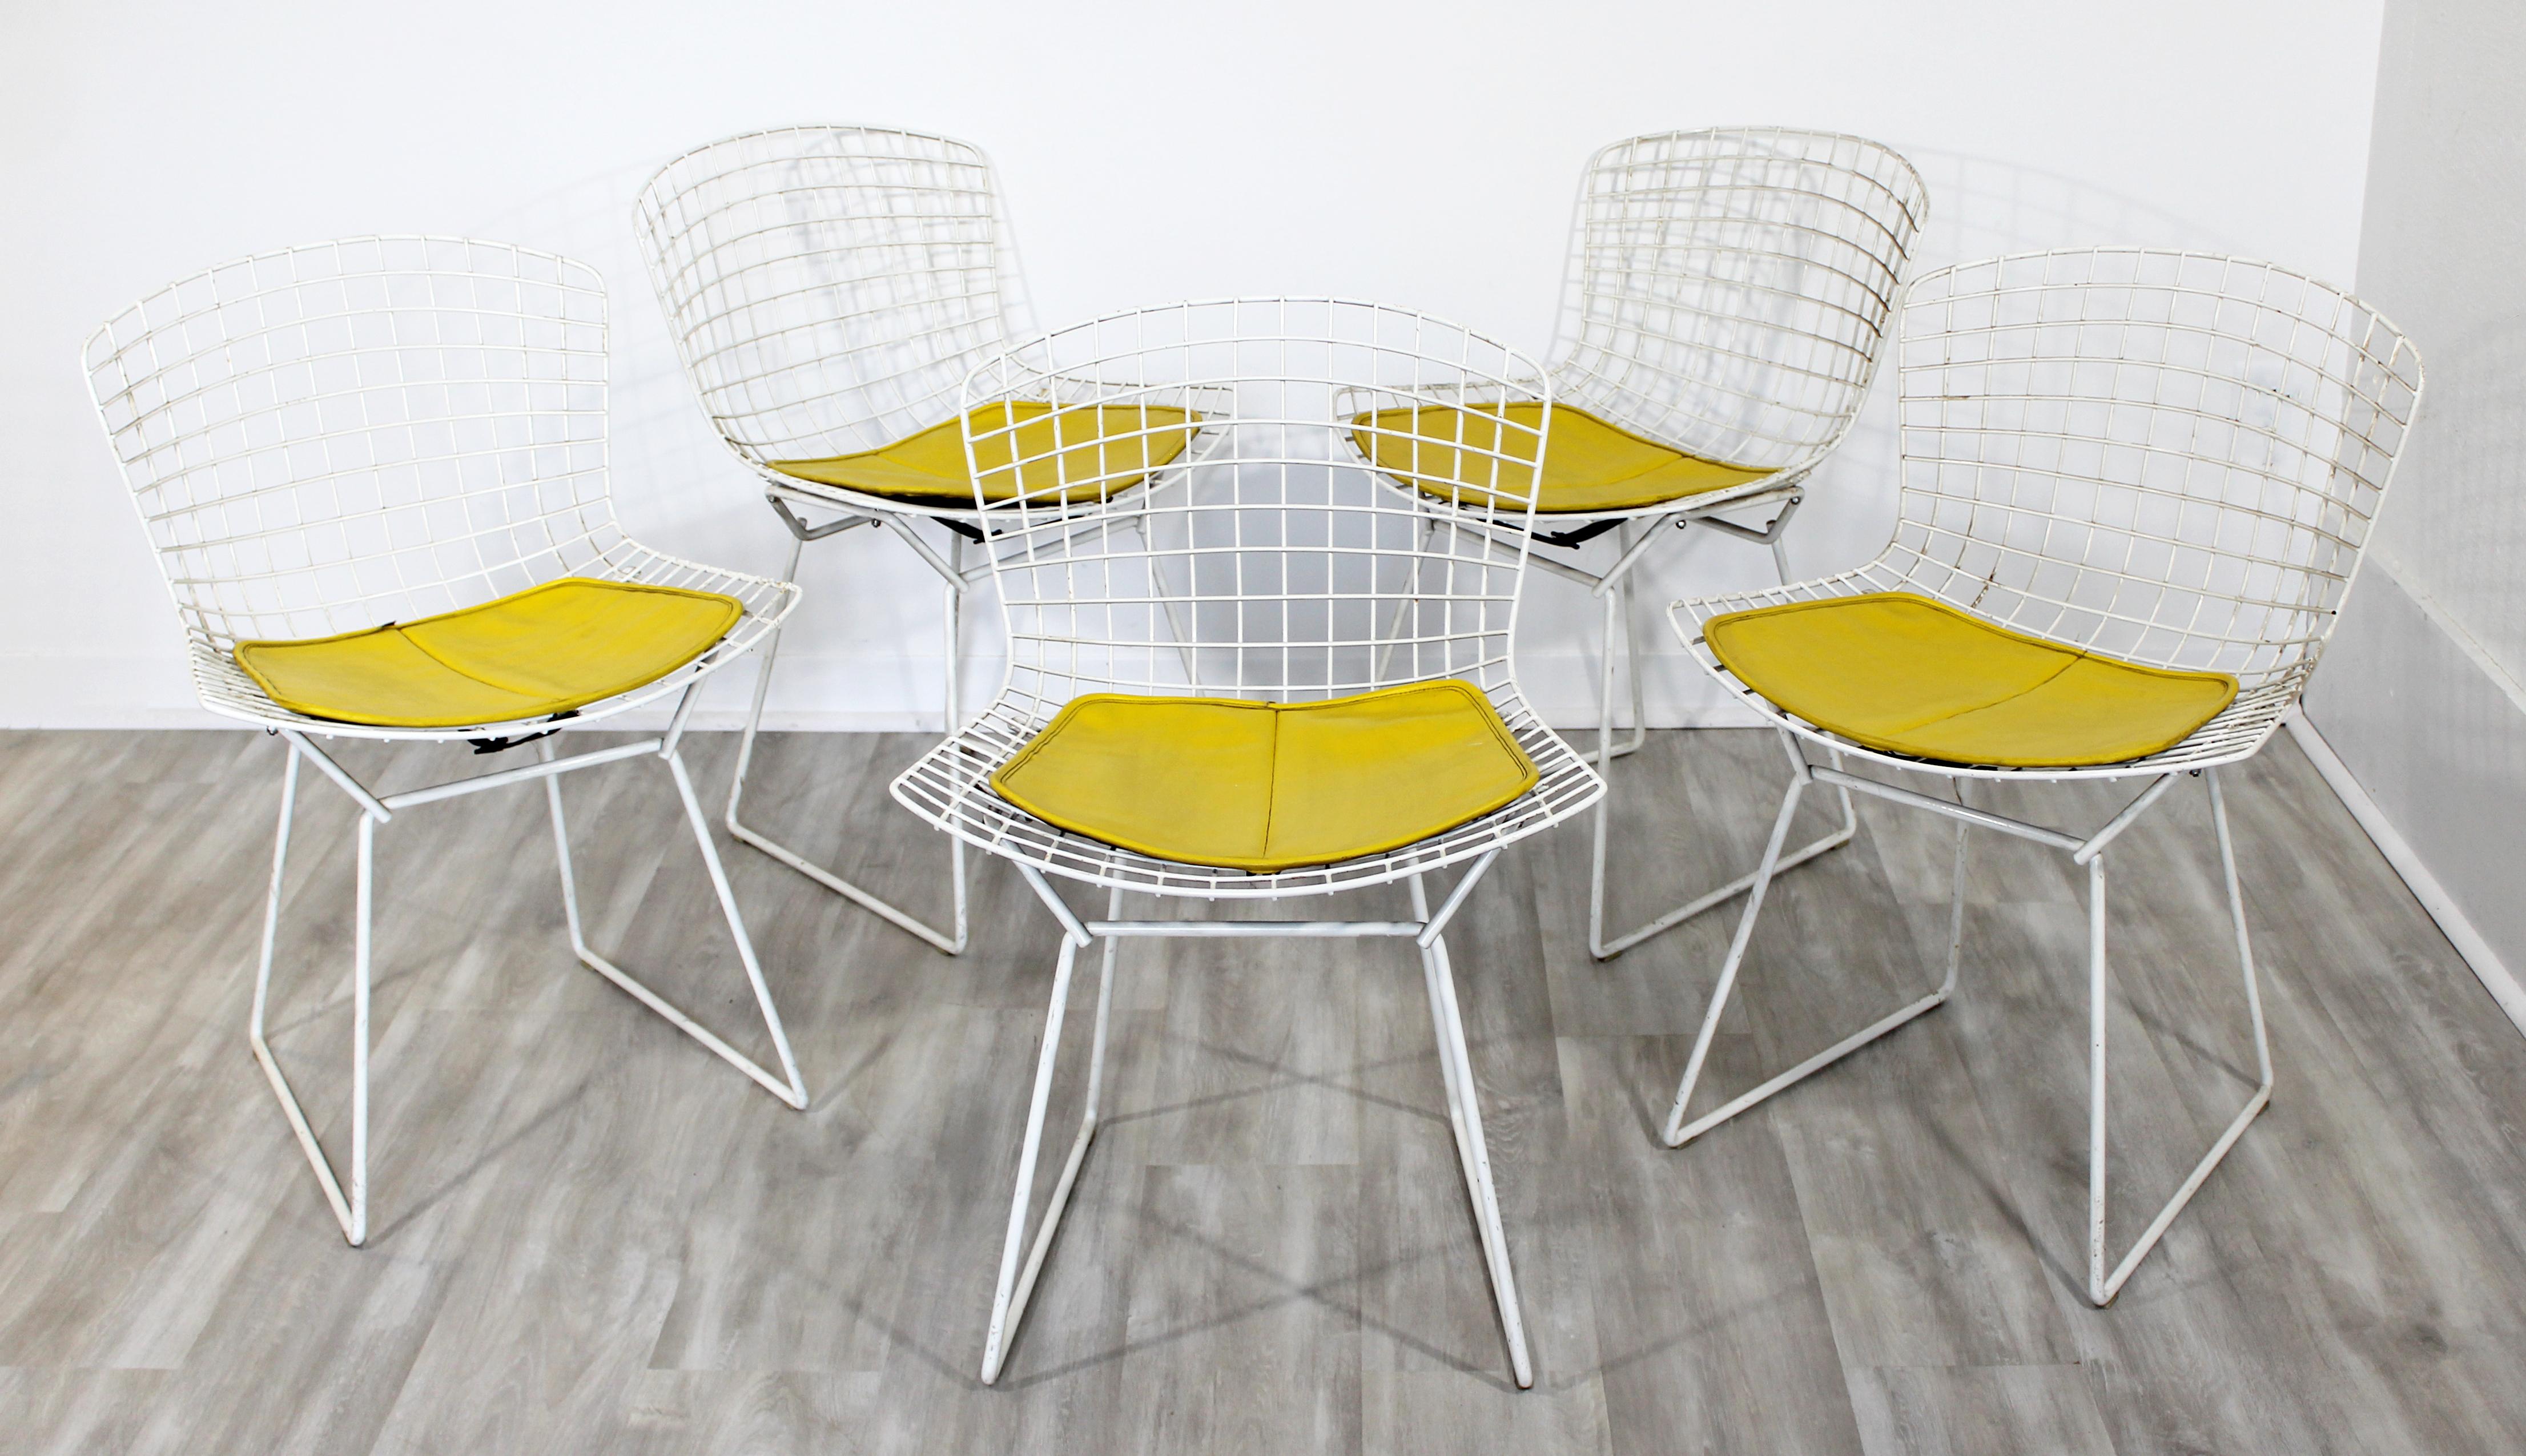 For your consideration is a phenomenal, original set of five white side chairs, with original yellow pad seats, by Harry Bertoia for Knoll, circa 1980. In very good vintage condition. The dimensions are 21